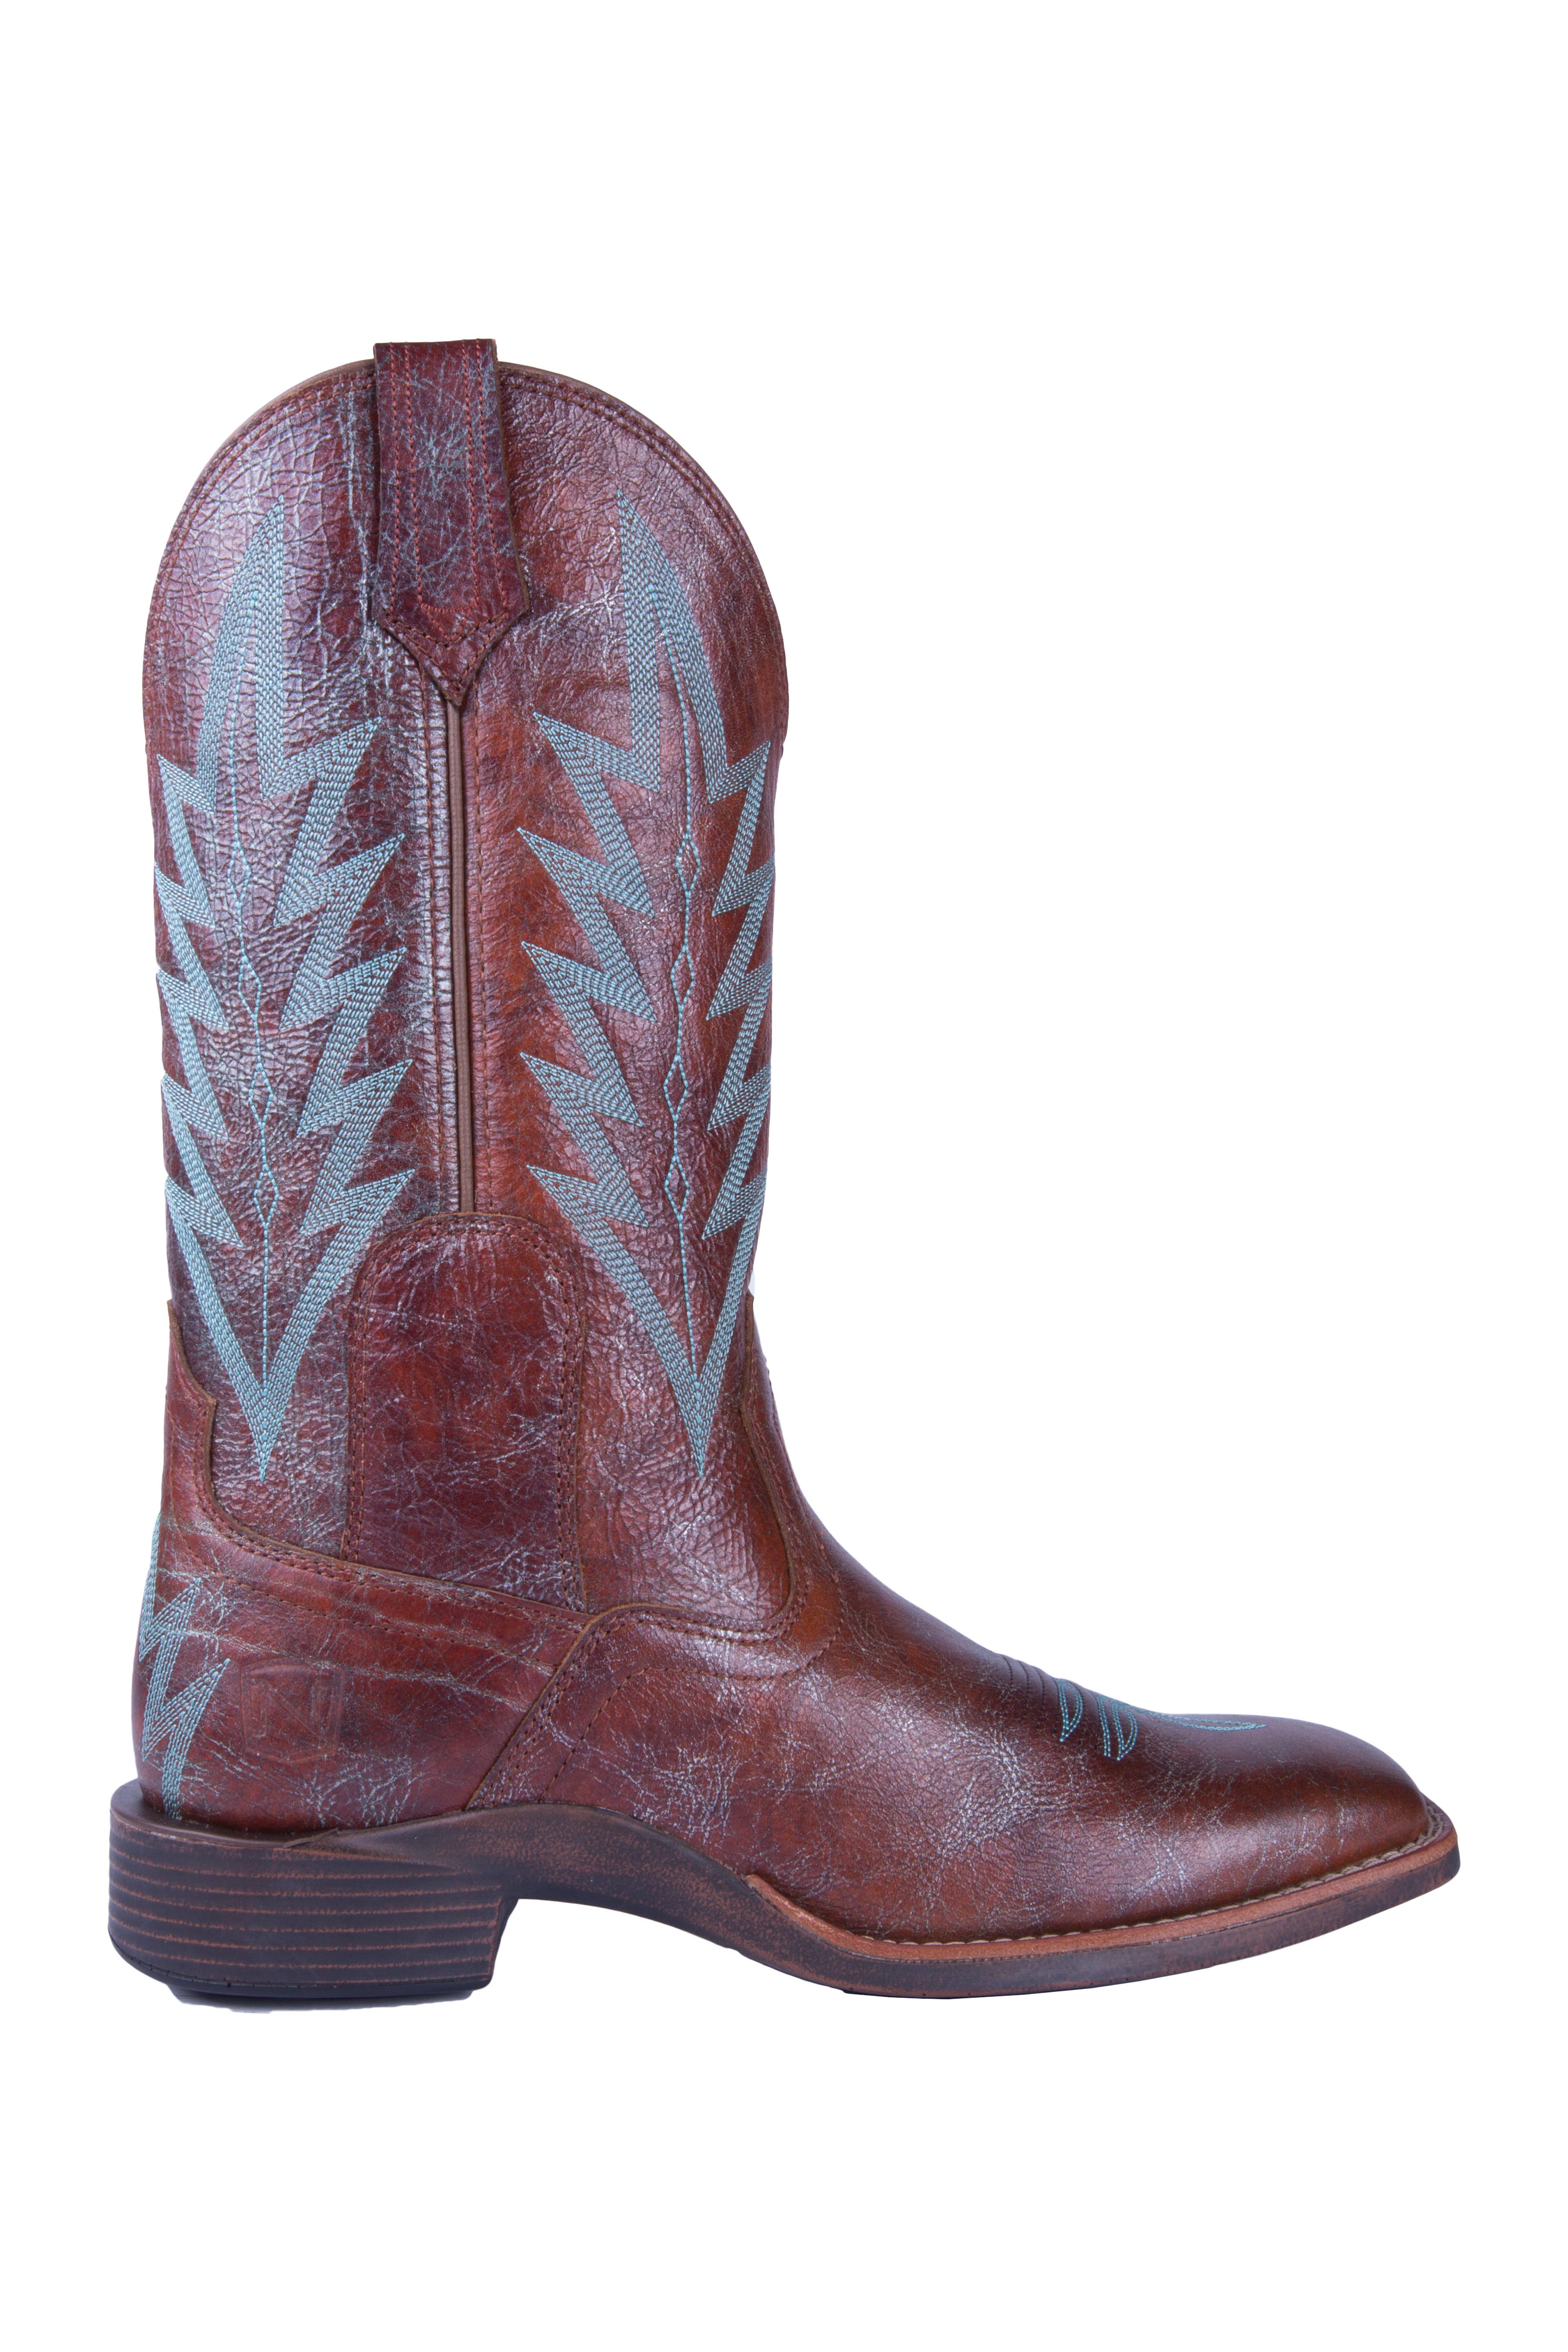 Noble Outfitters All Around Square Toe Dakota Boots - Ladies